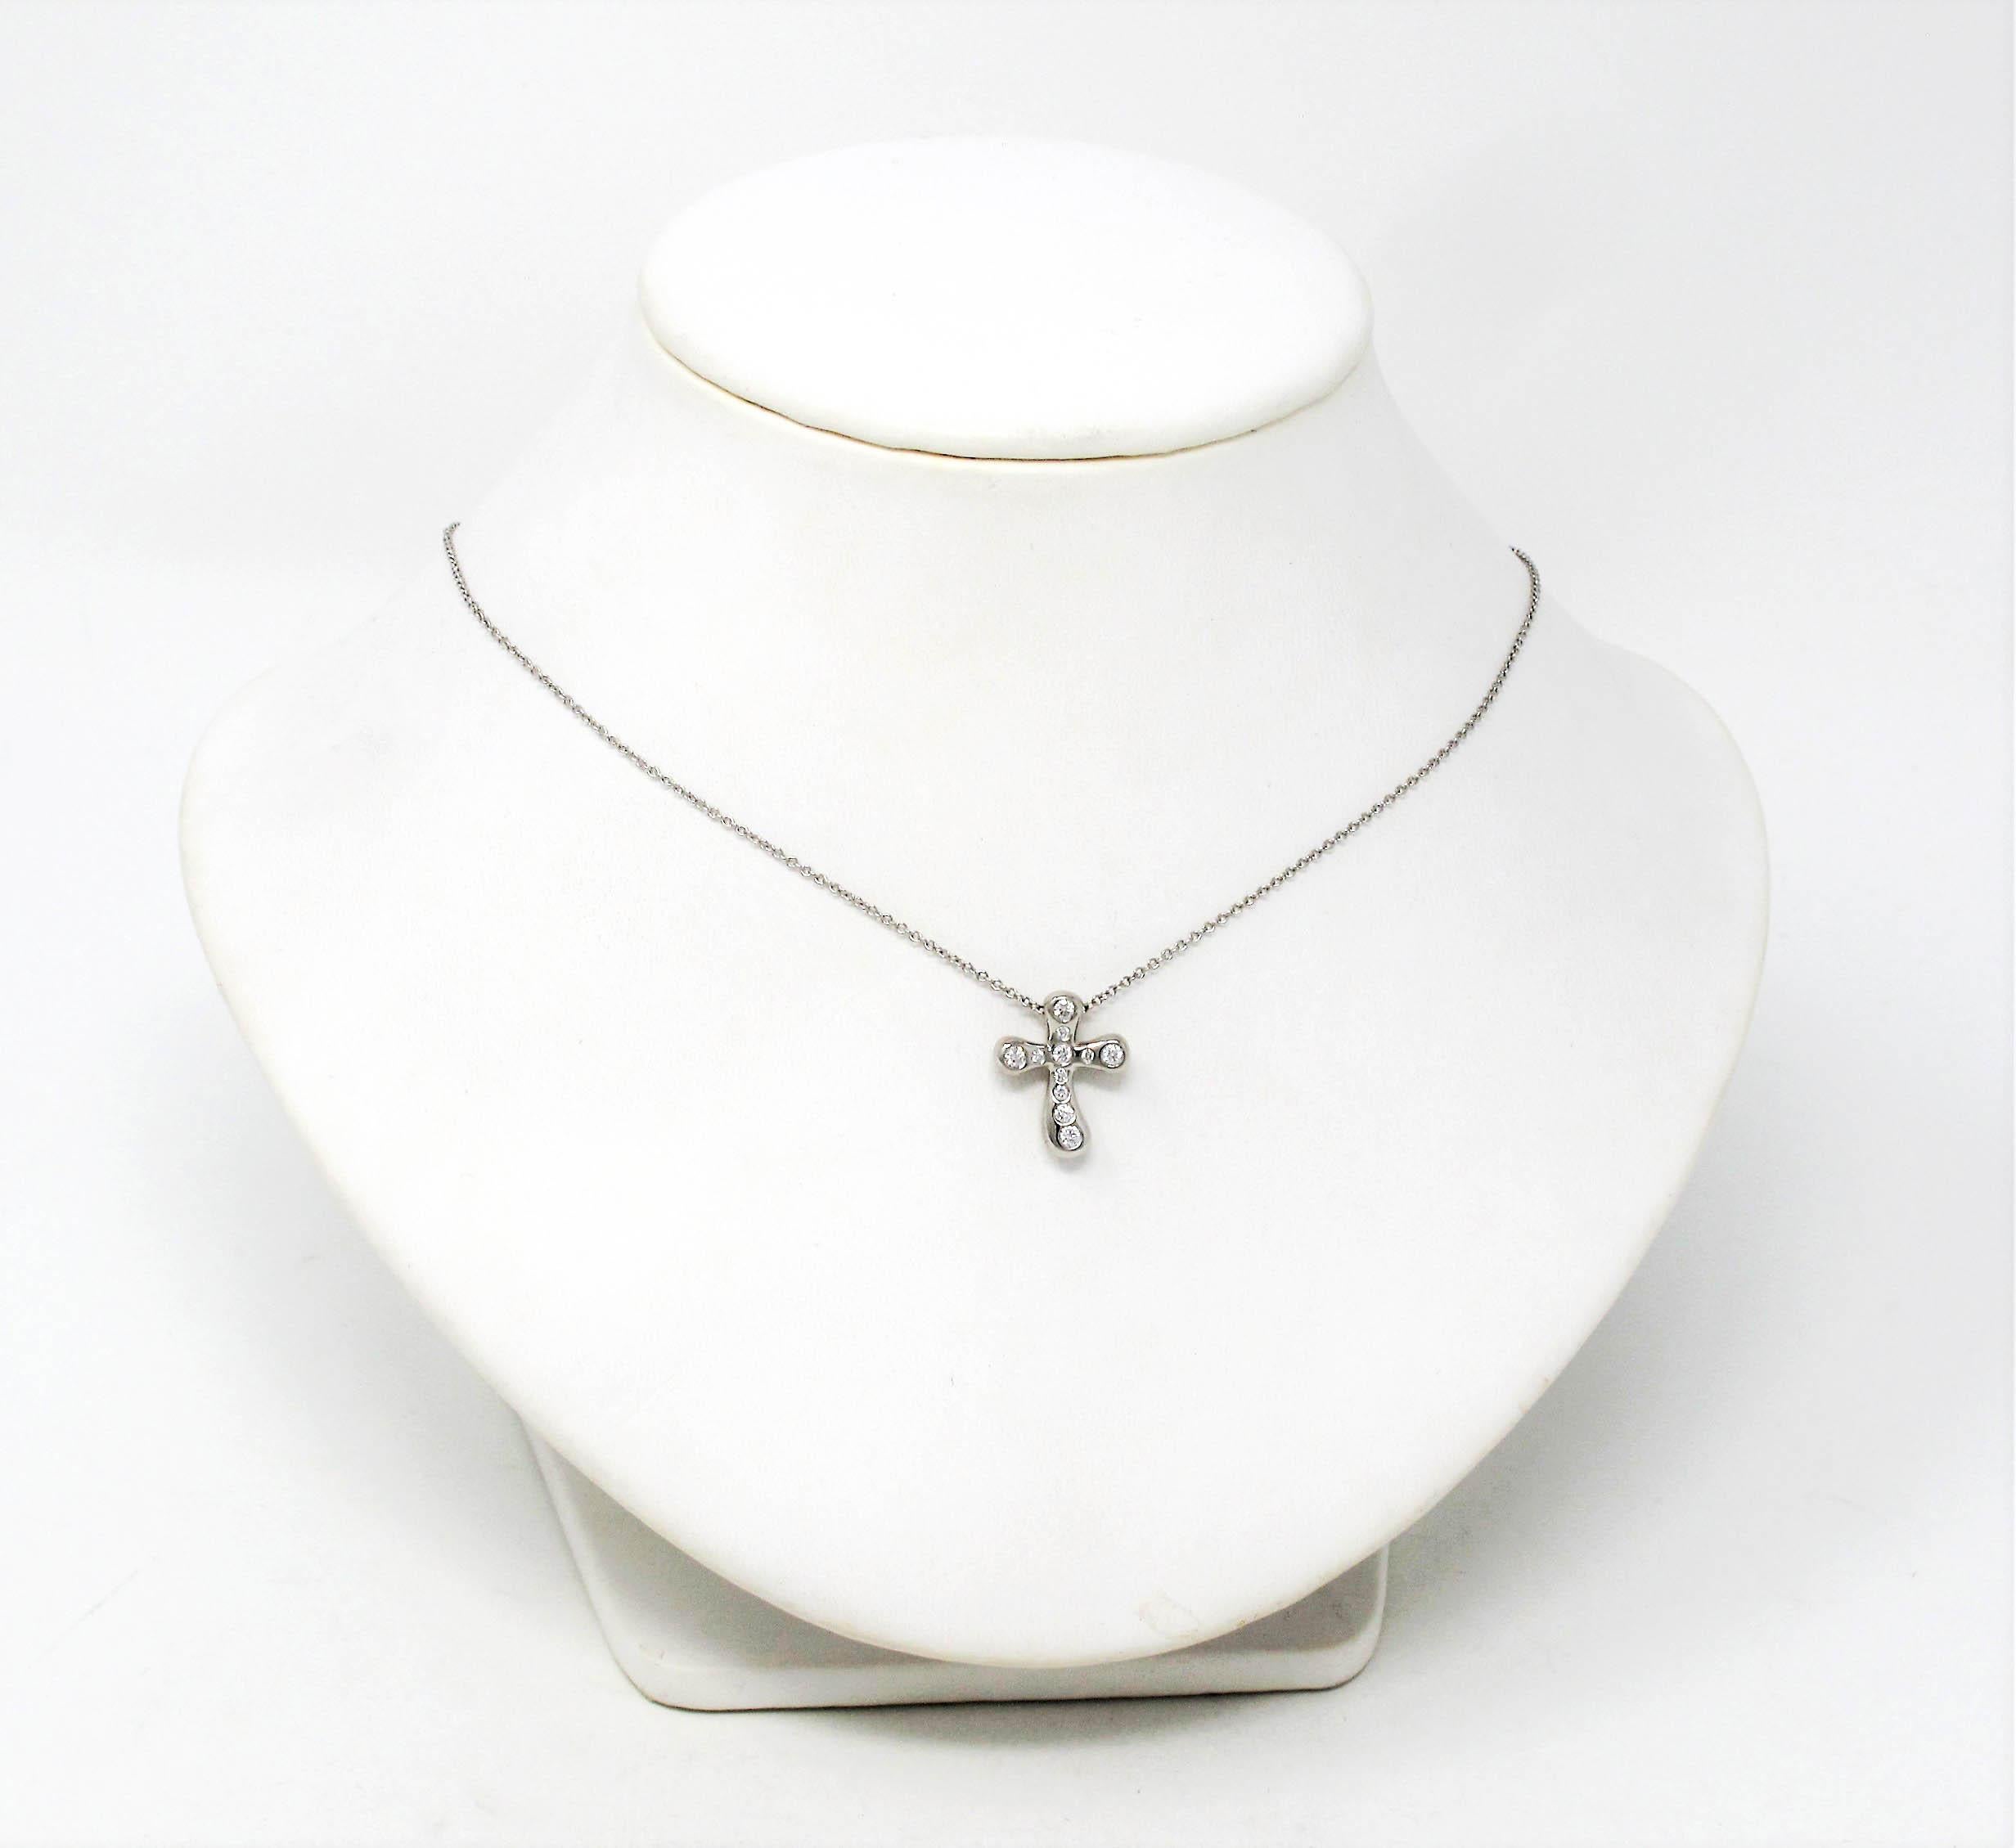 Simply stunning modernized diamond cross pendant necklace designed by Elsa Peretti for Tiffany & Co.. The delicate cross motif is embellished with glittering Tiffany diamonds, while the finely woven platinum chain gently hugs the neck. This keepsake